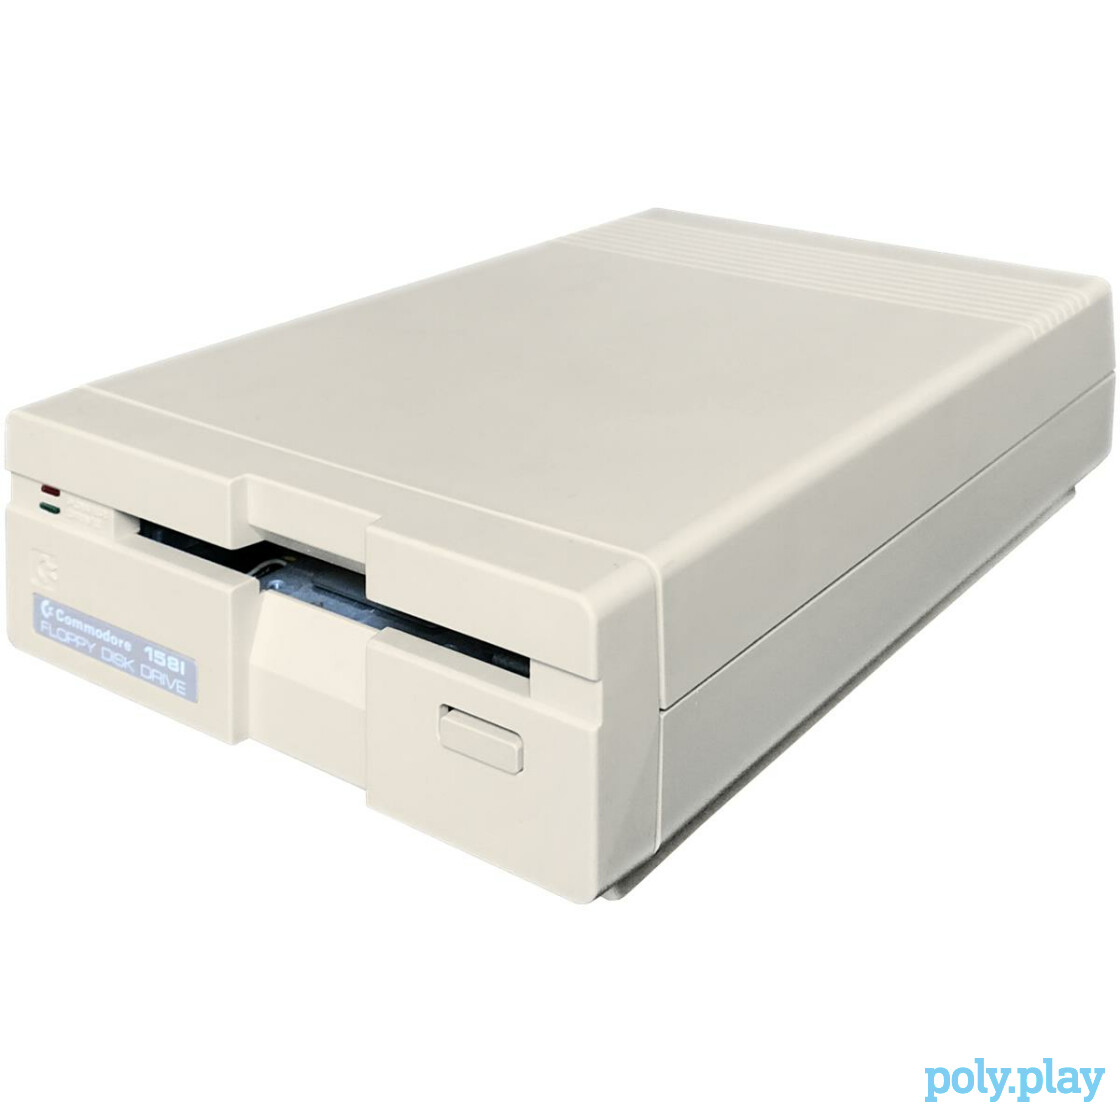 Commodore 1581 Floppy Disk Drive